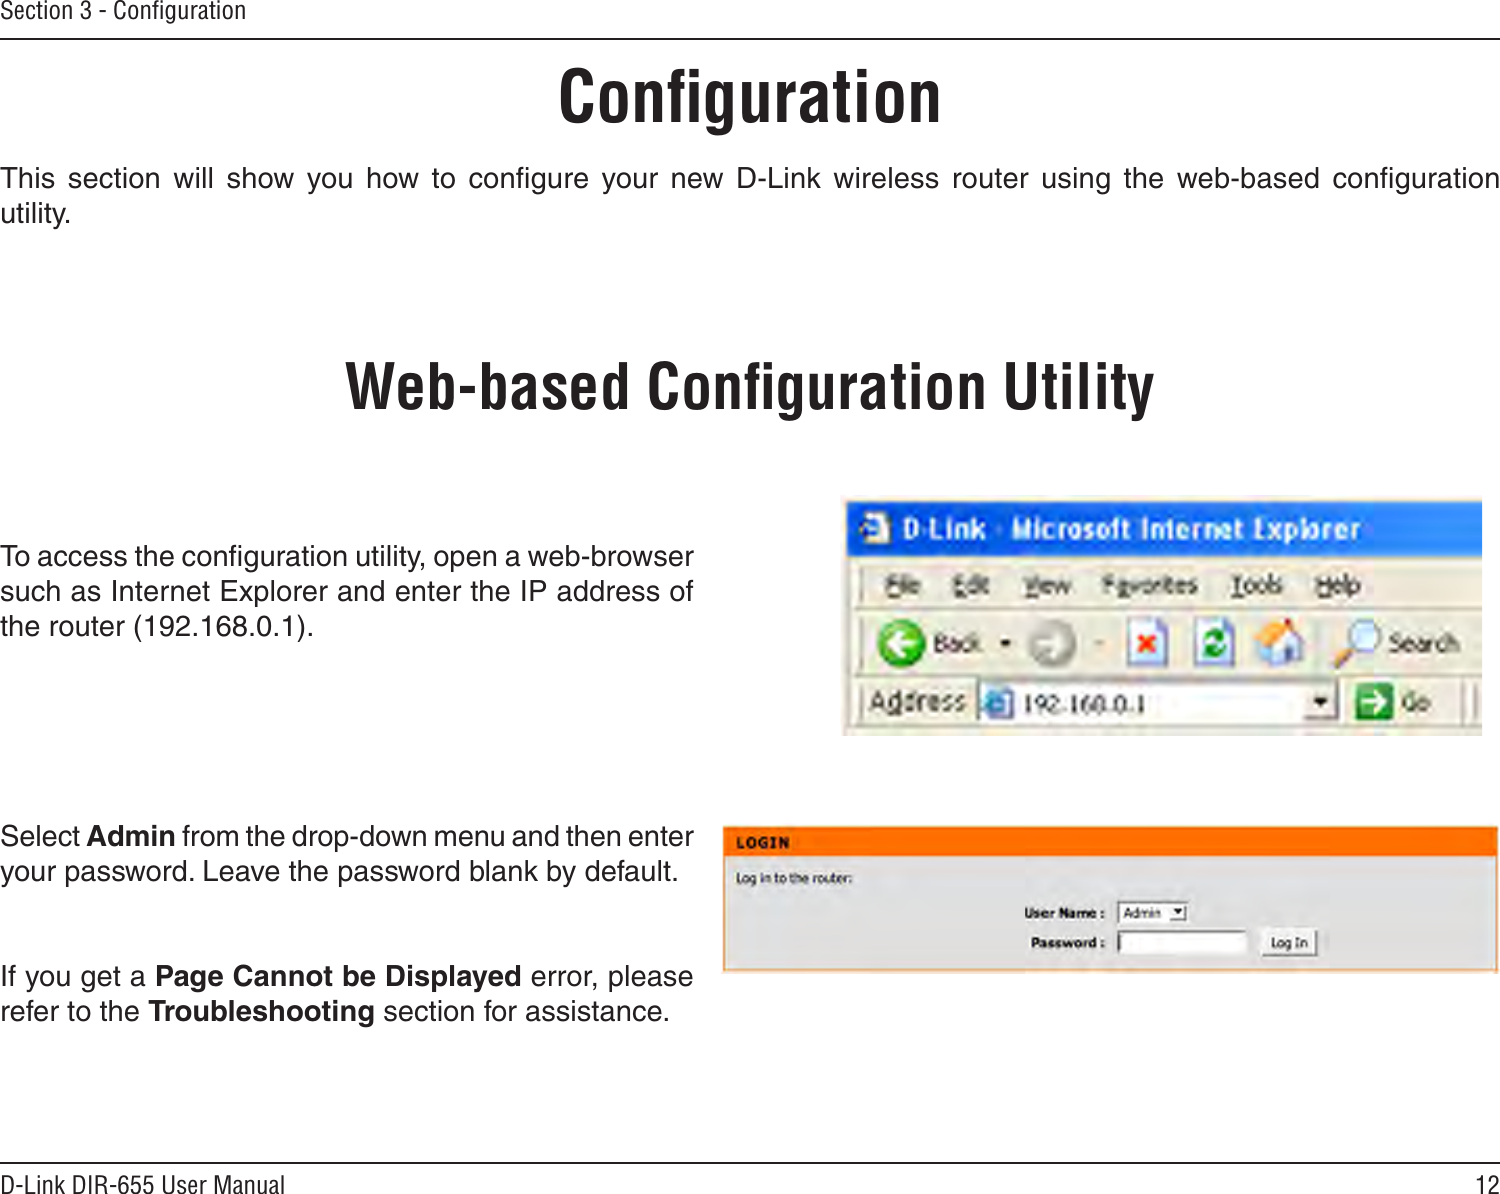 12D-Link DIR-655 User ManualSection 3 - ConﬁgurationConﬁgurationThis  section  will  show  you  how  to  conﬁgure  your  new  D-Link  wireless  router  using  the  web-based  conﬁguration utility.Web-based Conﬁguration UtilityTo access the conﬁguration utility, open a web-browser such as Internet Explorer and enter the IP address of the router (192.168.0.1).Select Admin from the drop-down menu and then enter your password. Leave the password blank by default.If you get a Page Cannot be Displayed error, please refer to the Troubleshooting section for assistance.